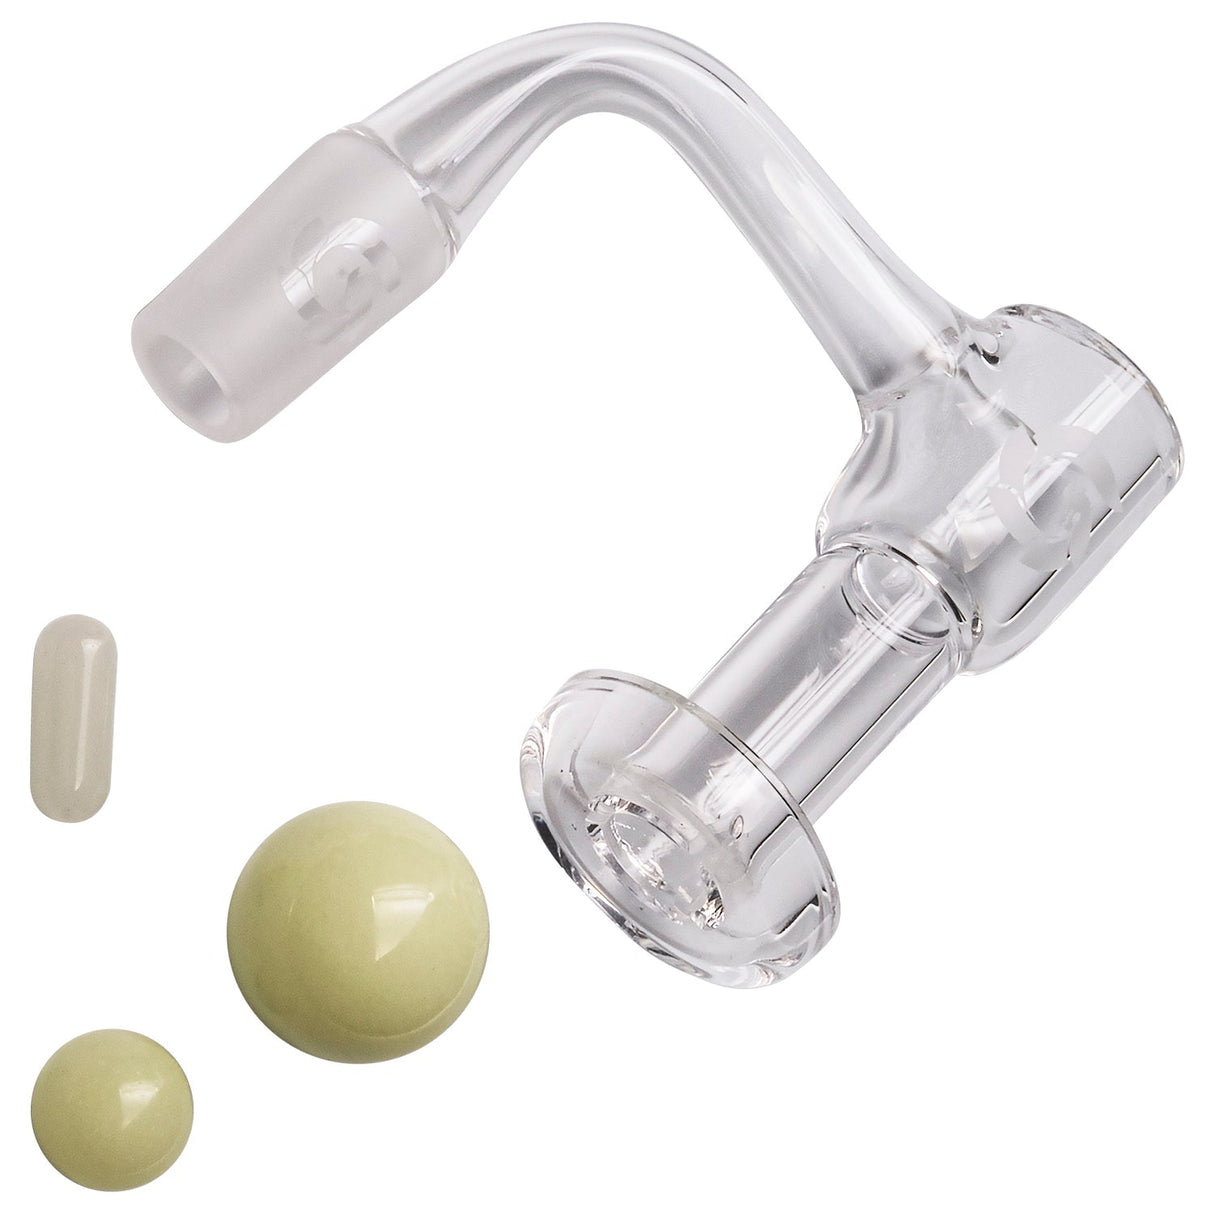 Glasshouse Mini Quartz Terp Vacuum Kit with 14mm Male Joint and Two Pearls